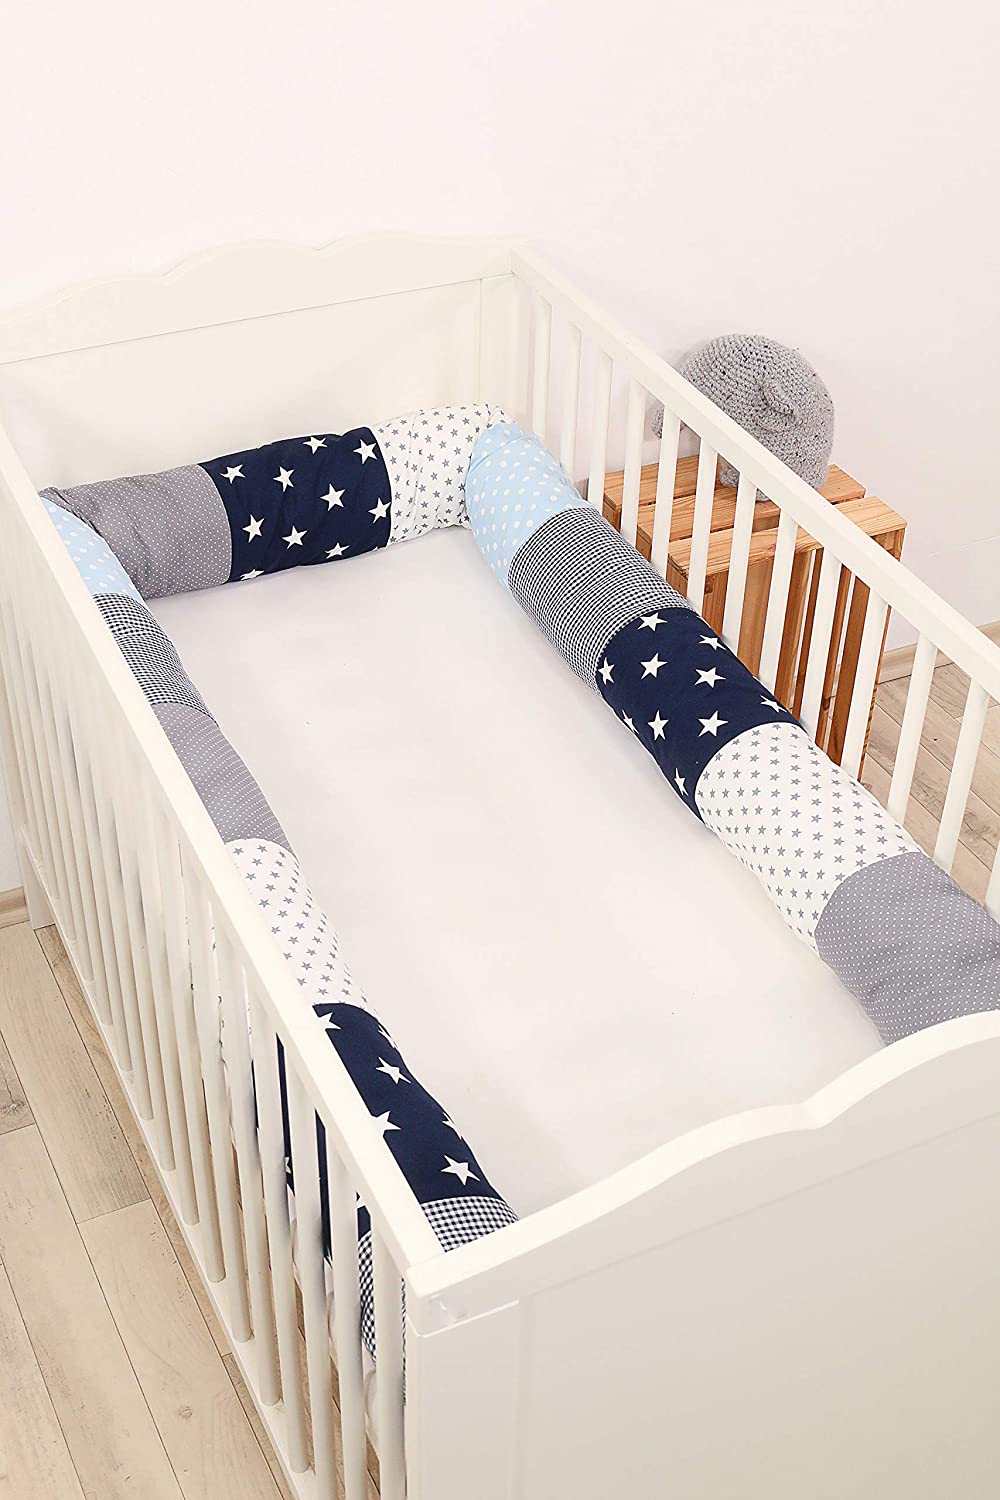 Ullenboom® Bed Snake, Cot Bumper Snake in 10 Designs & 3 Lengths (Baby Bed Roll 120 cm / 180 cm / 200 cm, Ideal as a Baby Bed Edge Protector, Positioning Pillow)